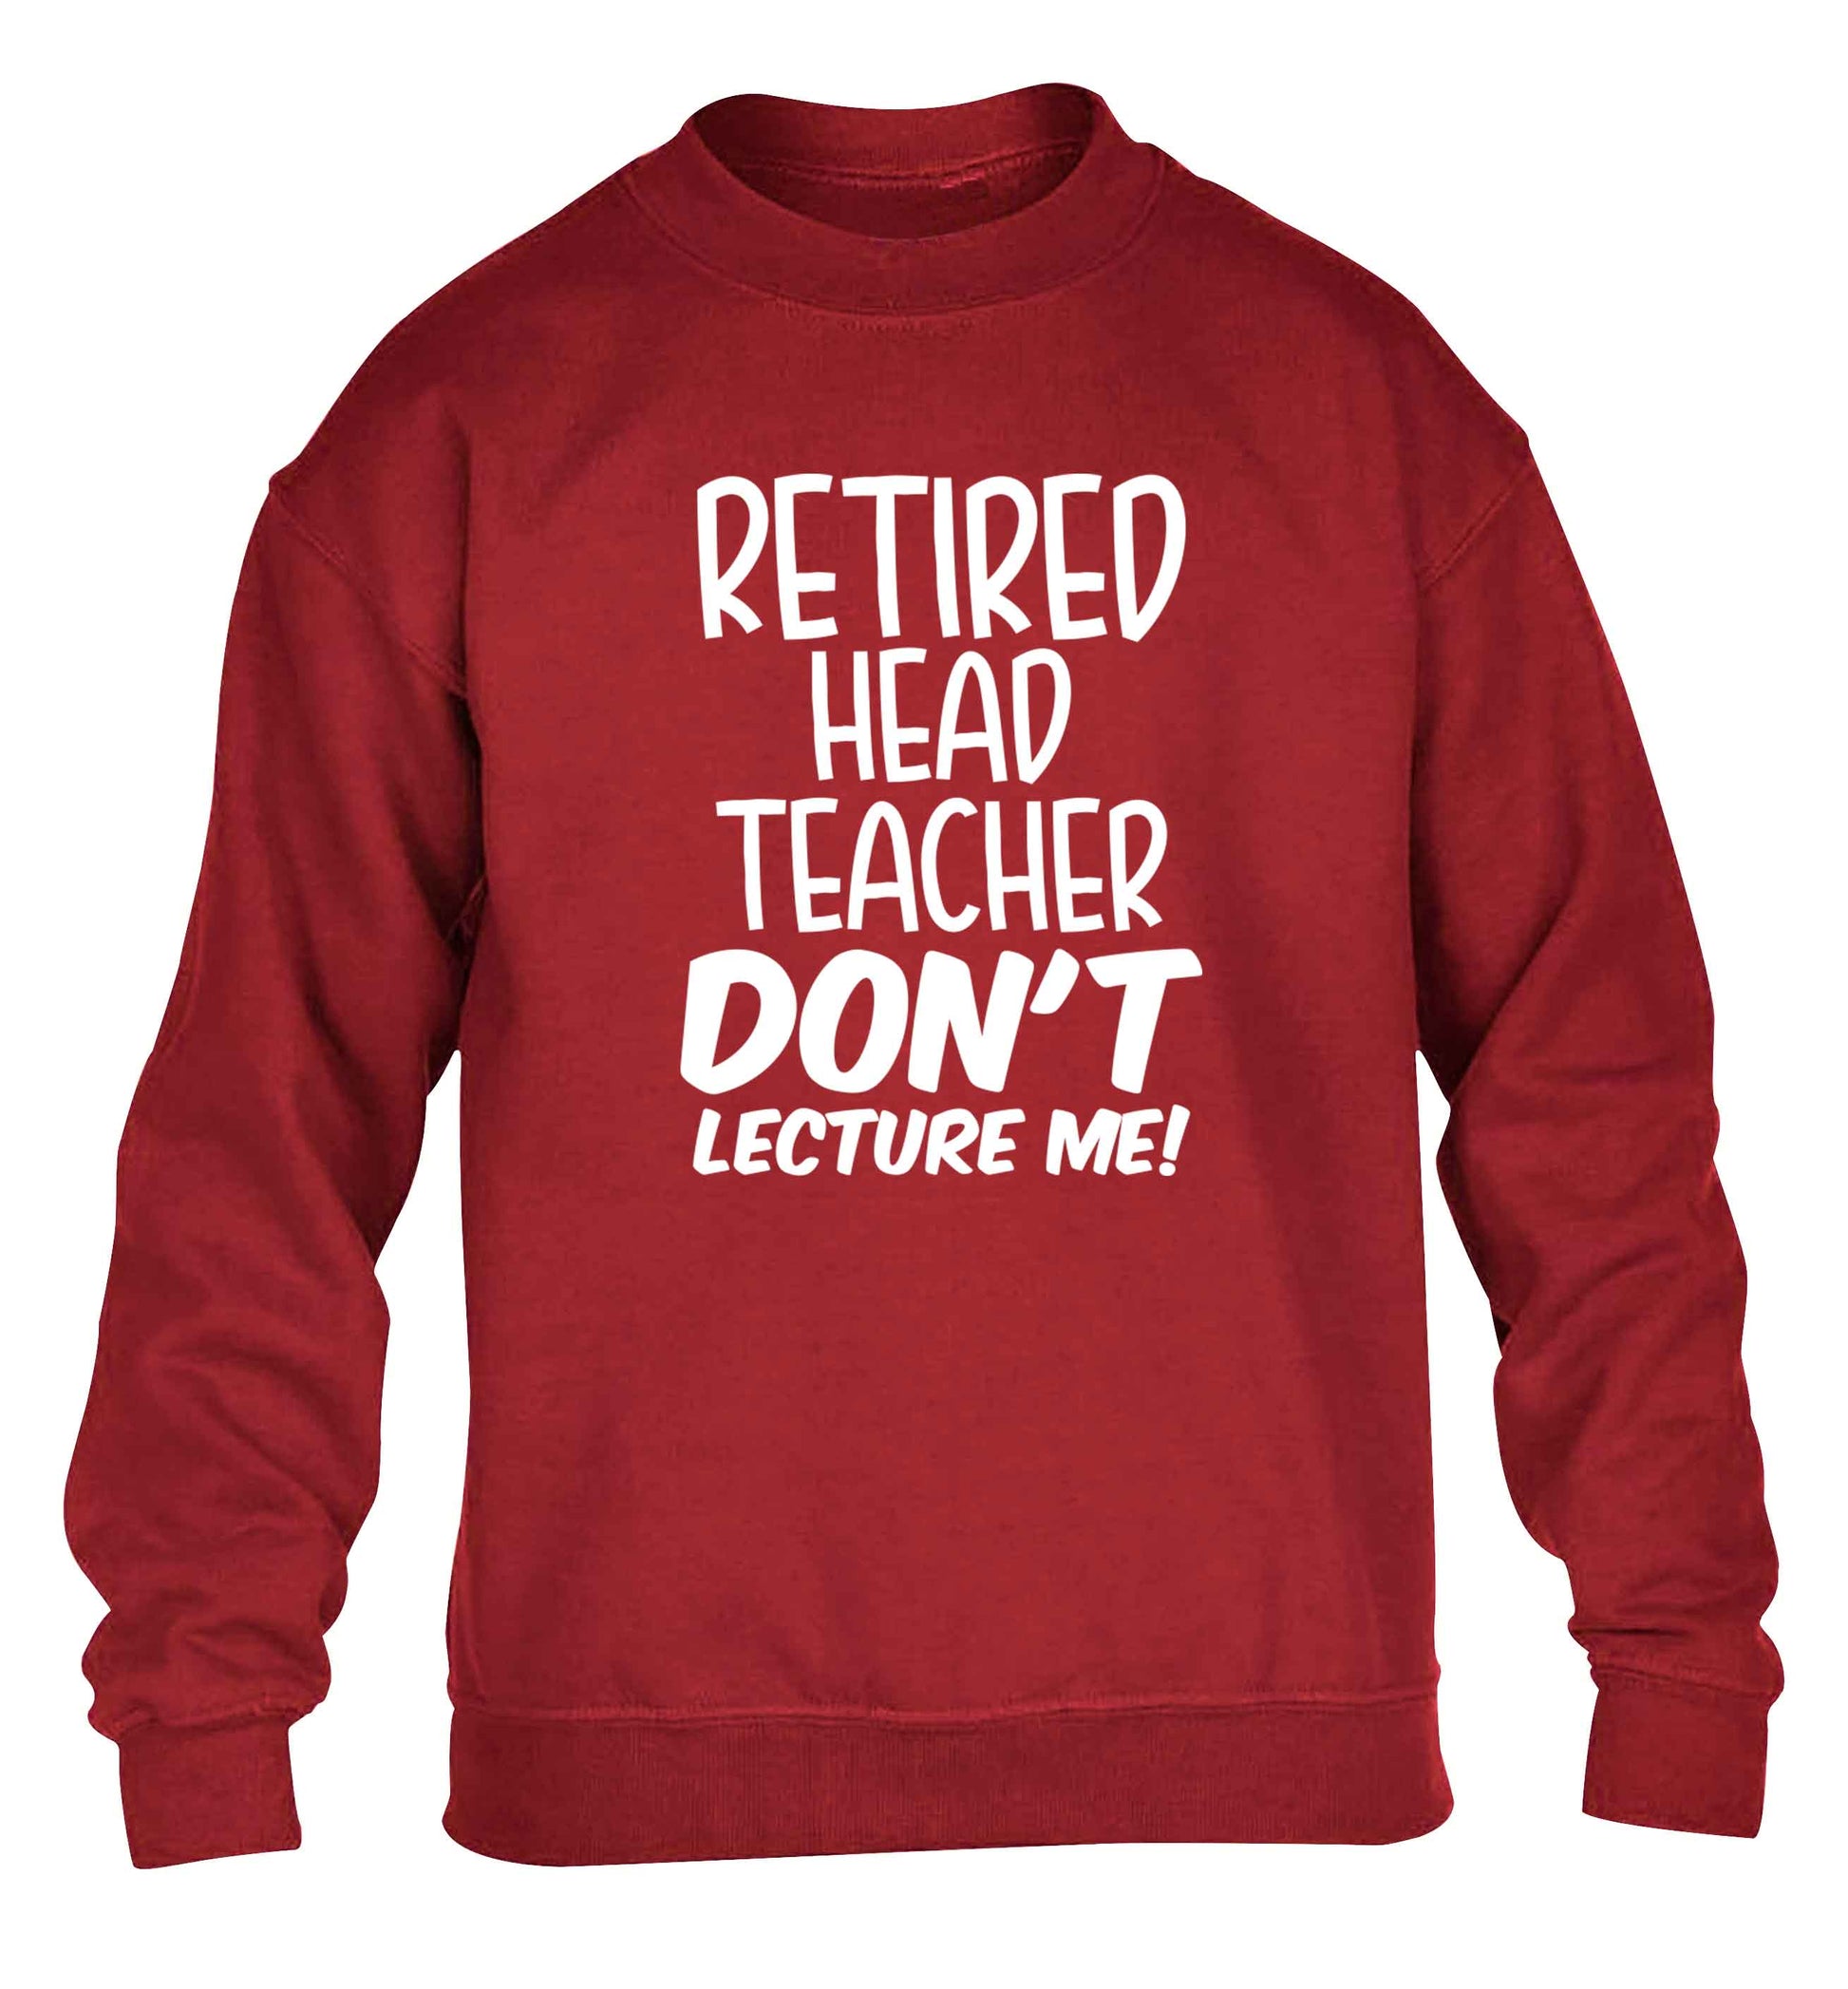 Retired head teacher don't lecture me! children's grey sweater 12-13 Years